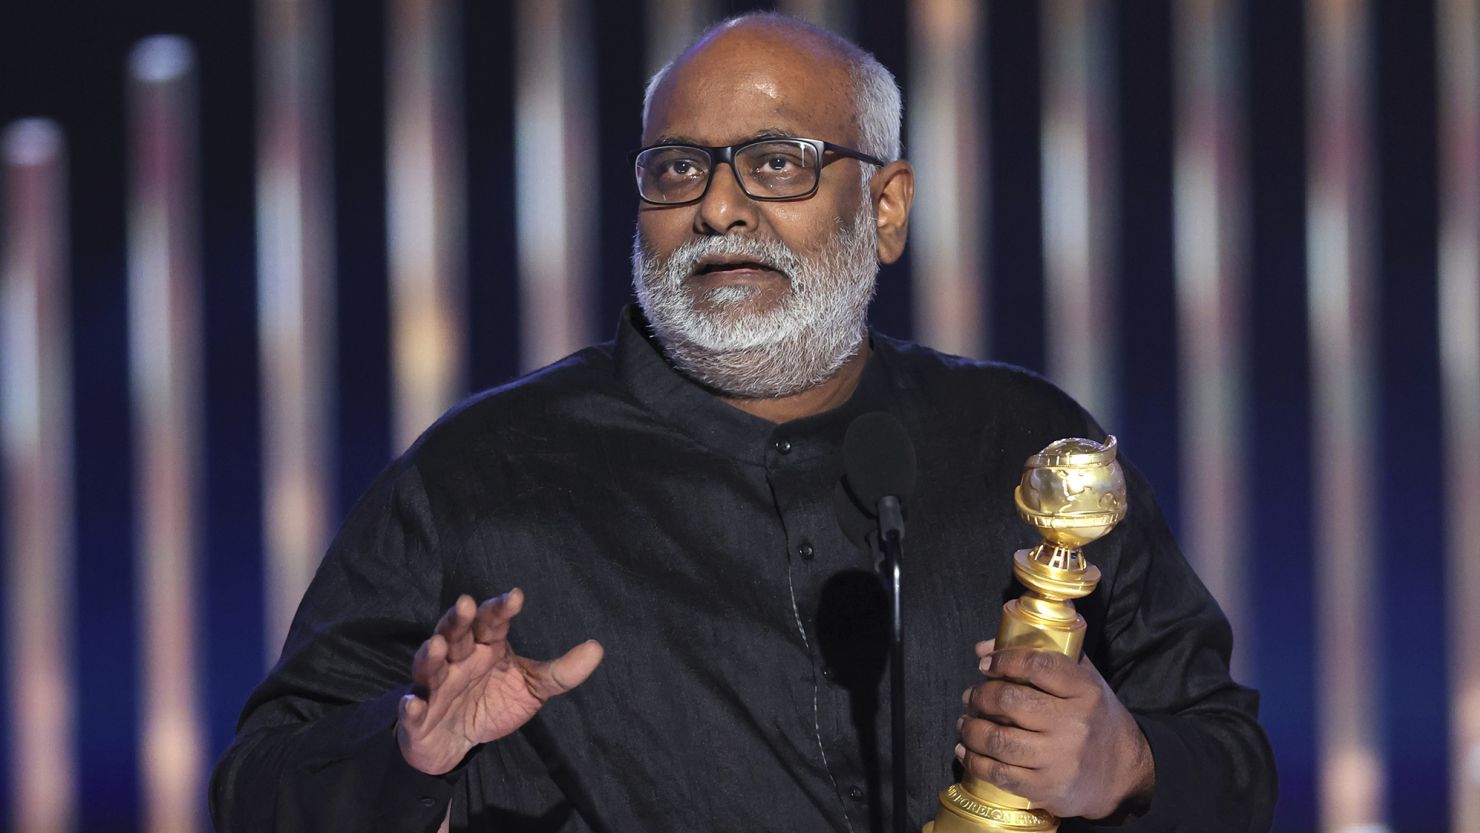 Indians celebrate their country’s first ever Golden Globes win | CNN